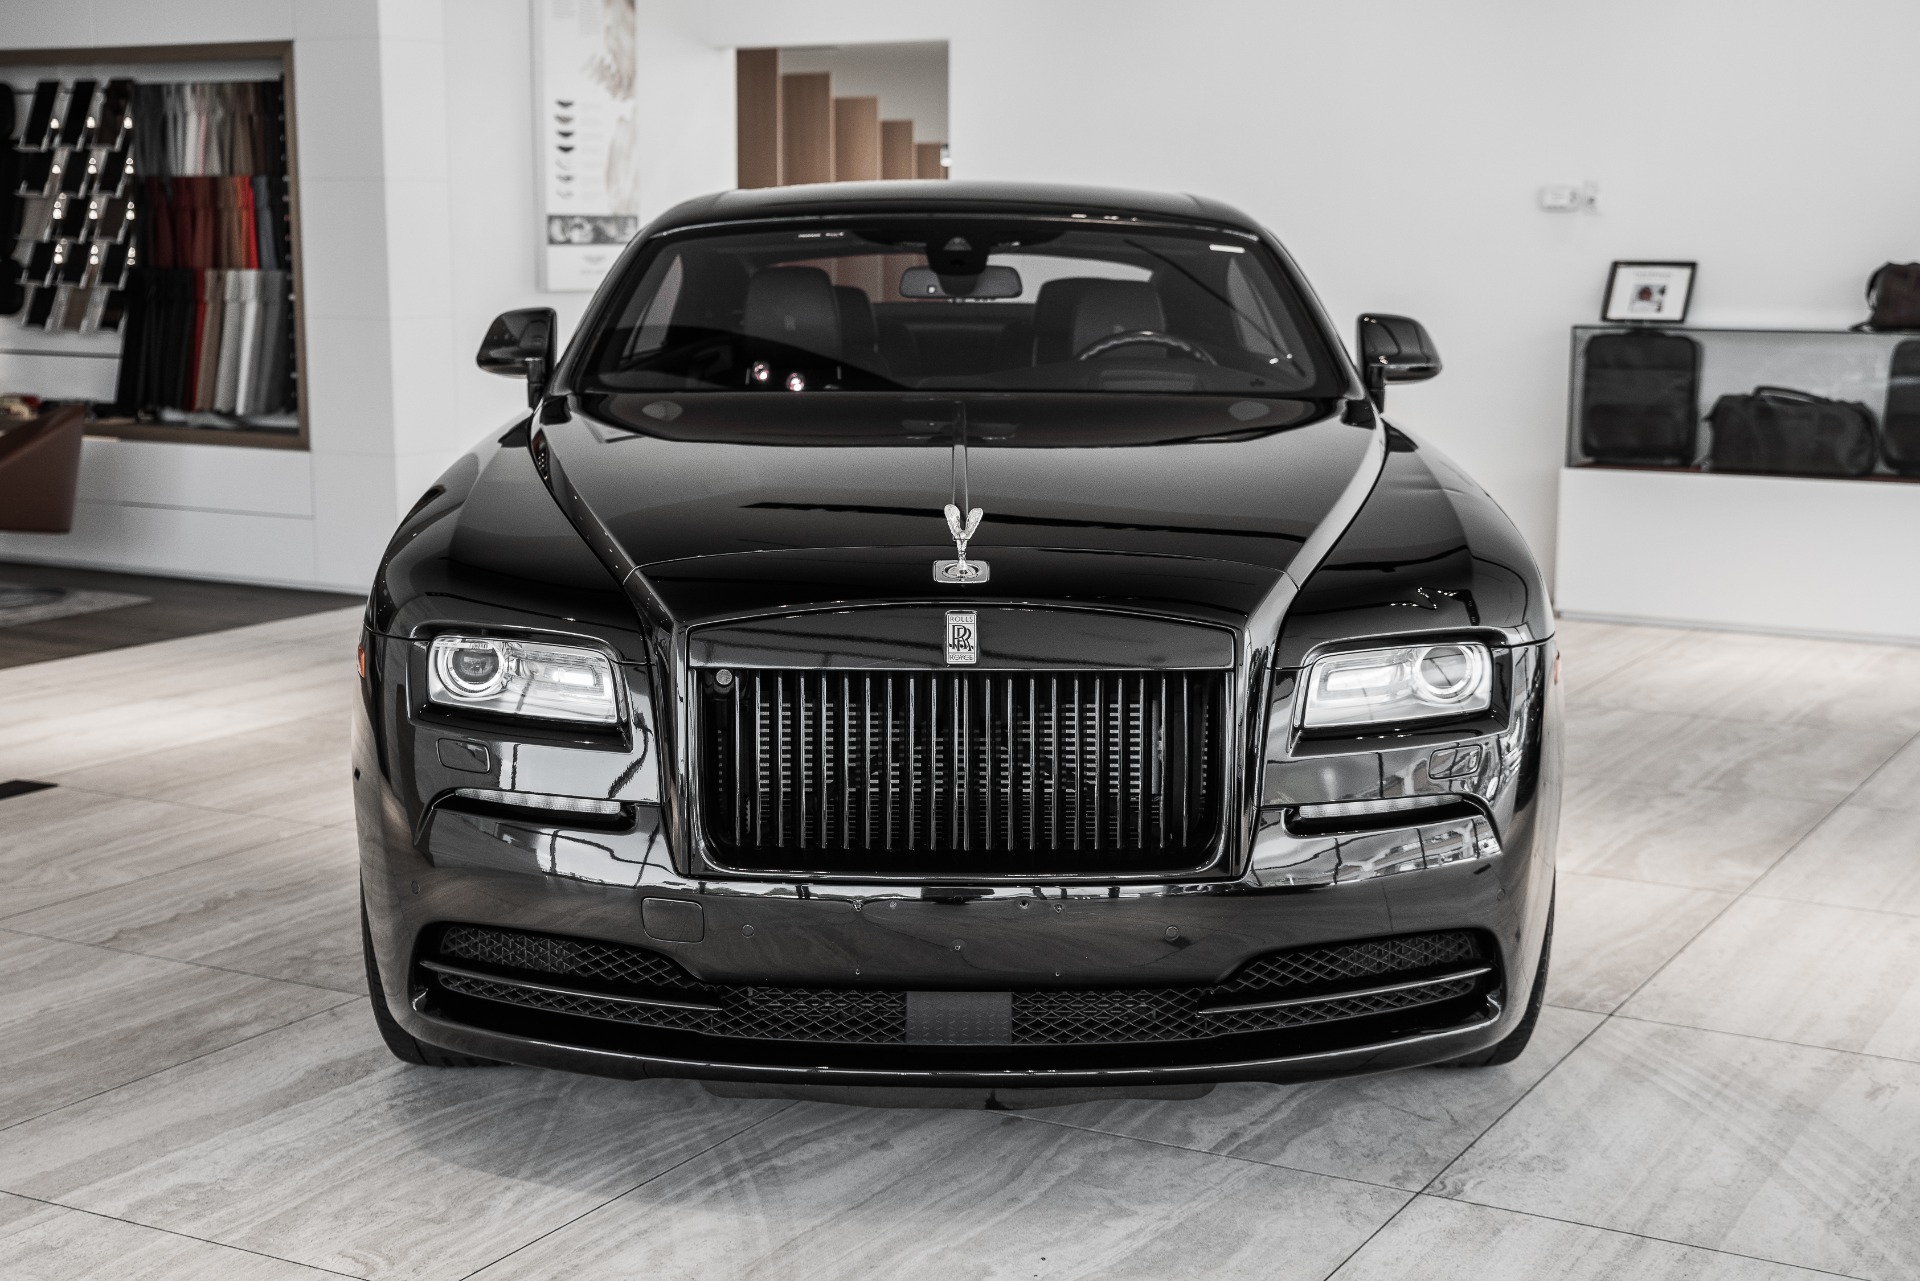 Used 2016 Rolls-Royce Wraith DRIVERS ASSISTANCE PKG! HEADS UP DISPLAY! ONLY  14K MILES! For Sale ($209,800)